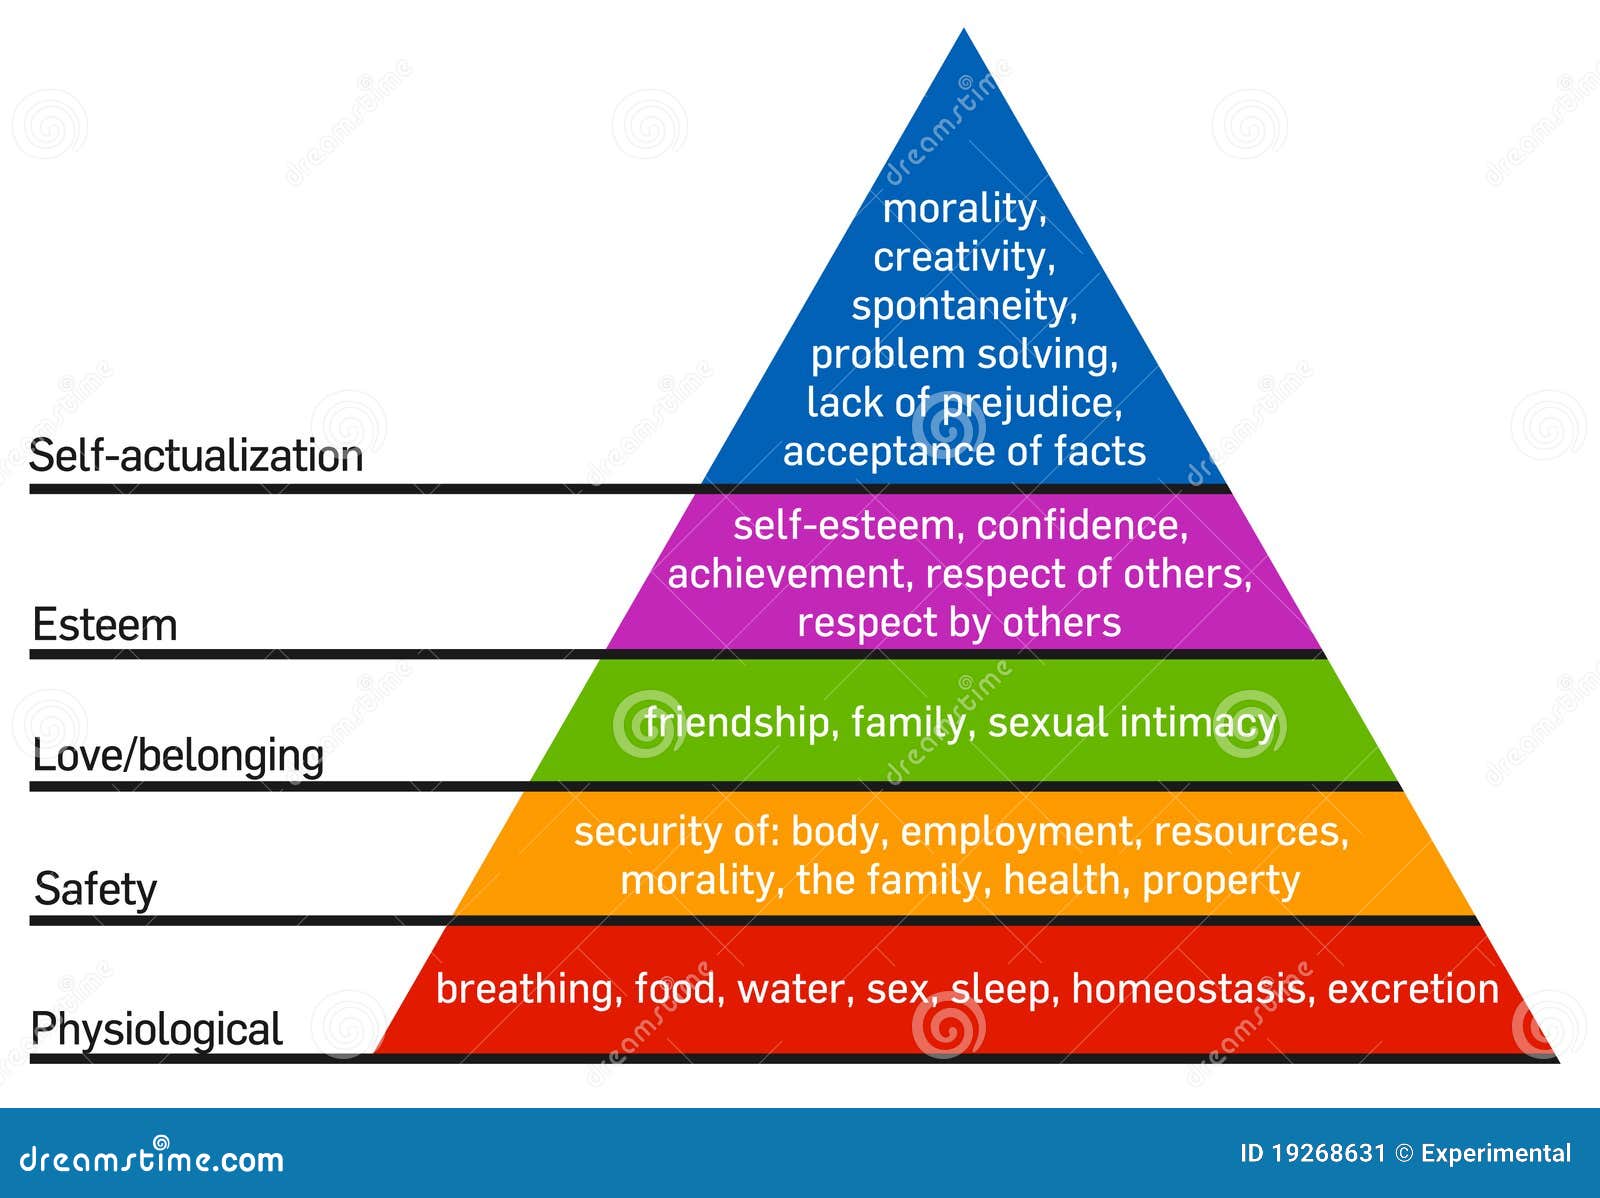 hierarchy of needs of maslow